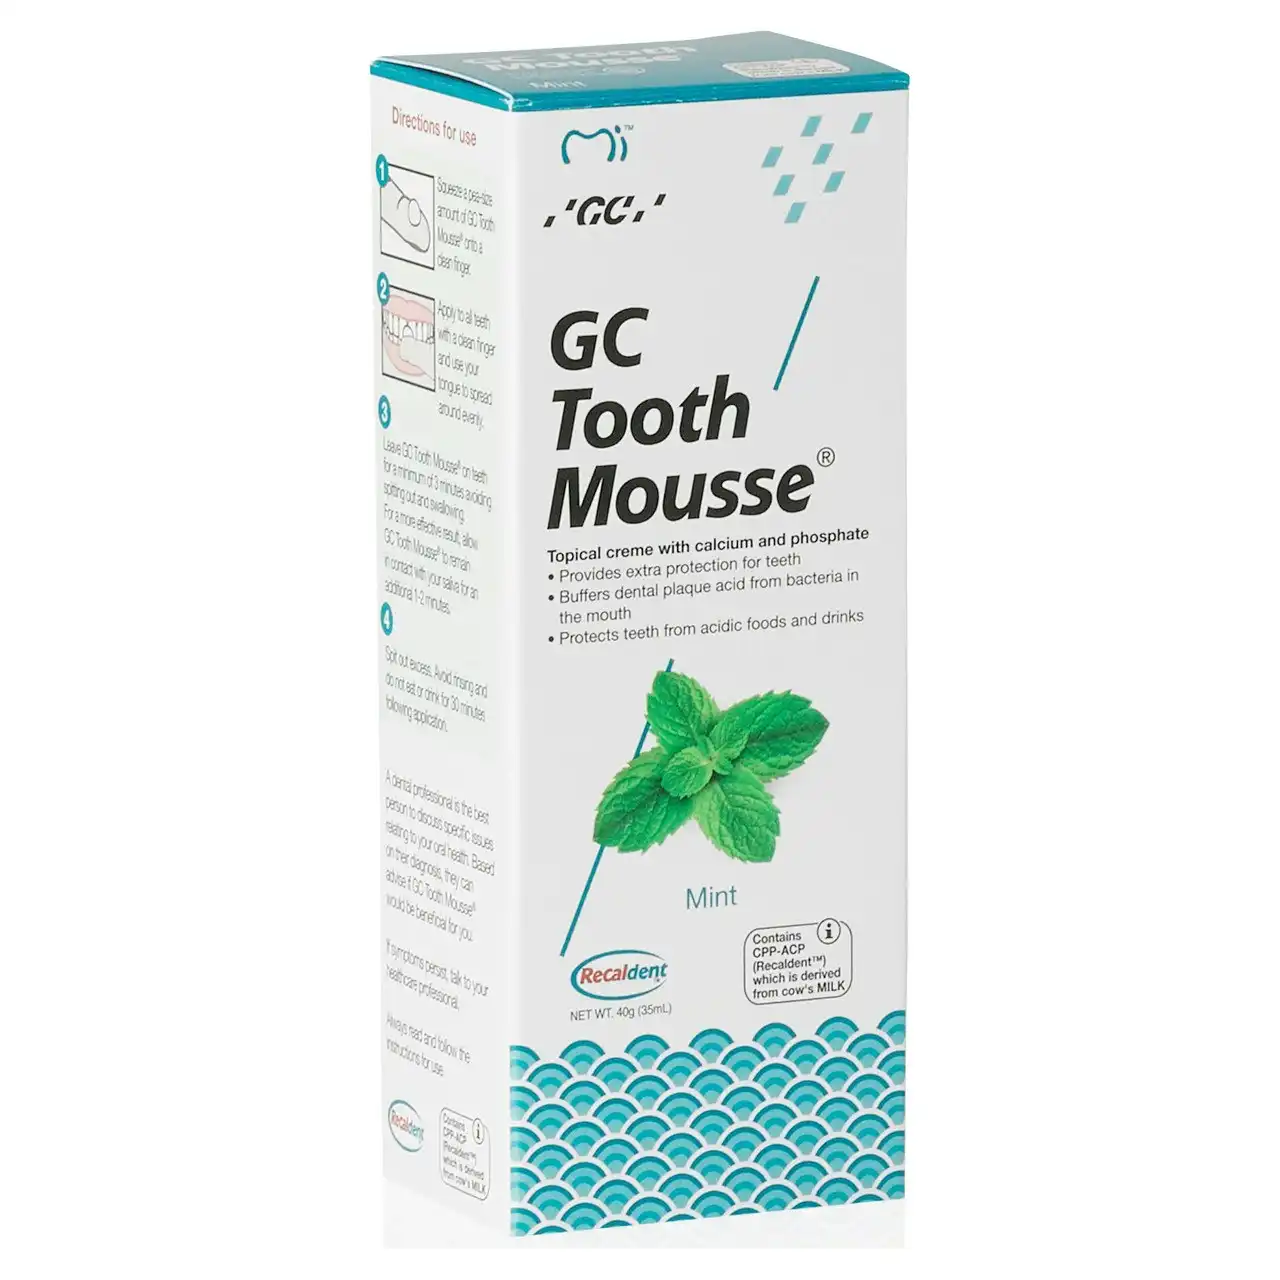 GC Tooth Mousse(TM) Mint